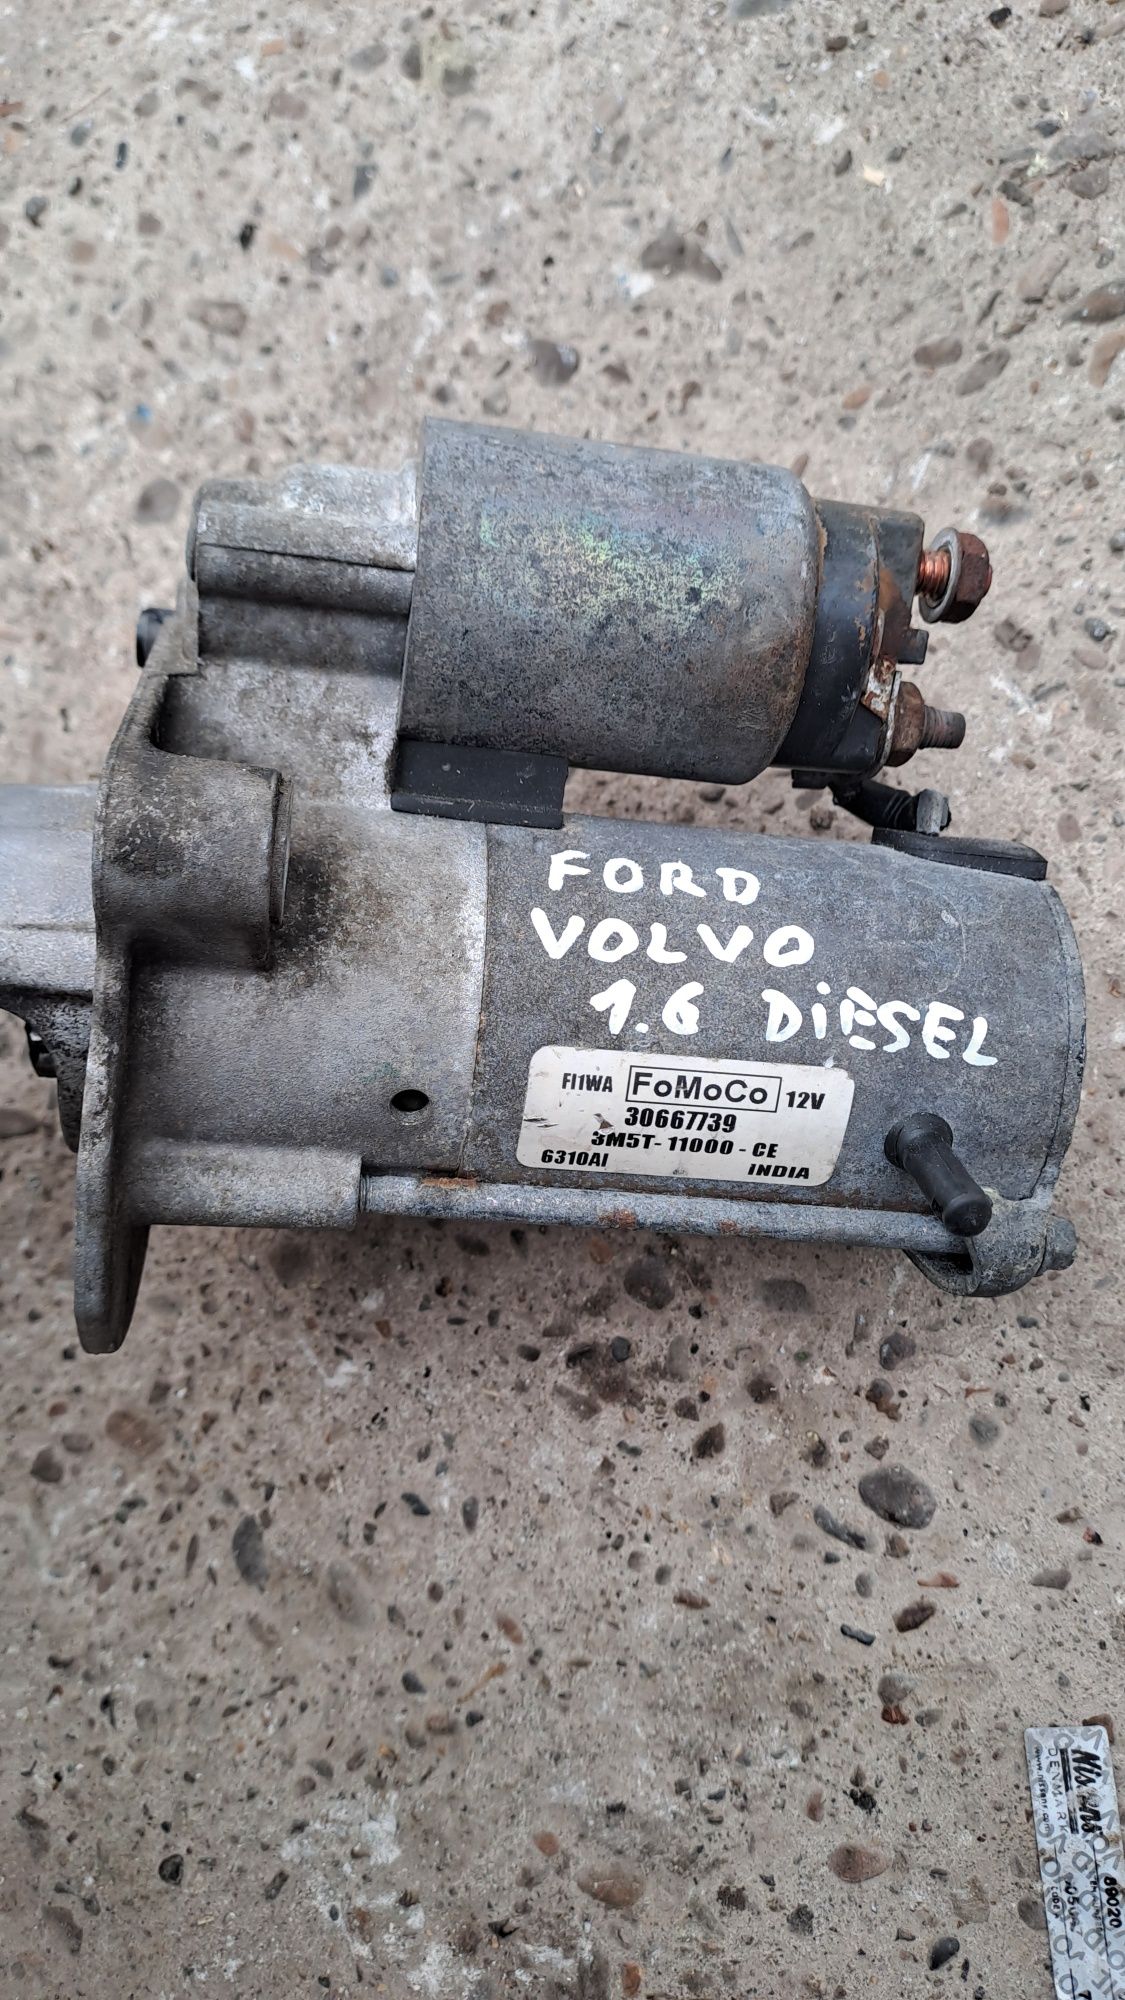 Electromotor, 3M5T-11000-CE, Ford Focus 2,1.6 tdci volvo 1.6